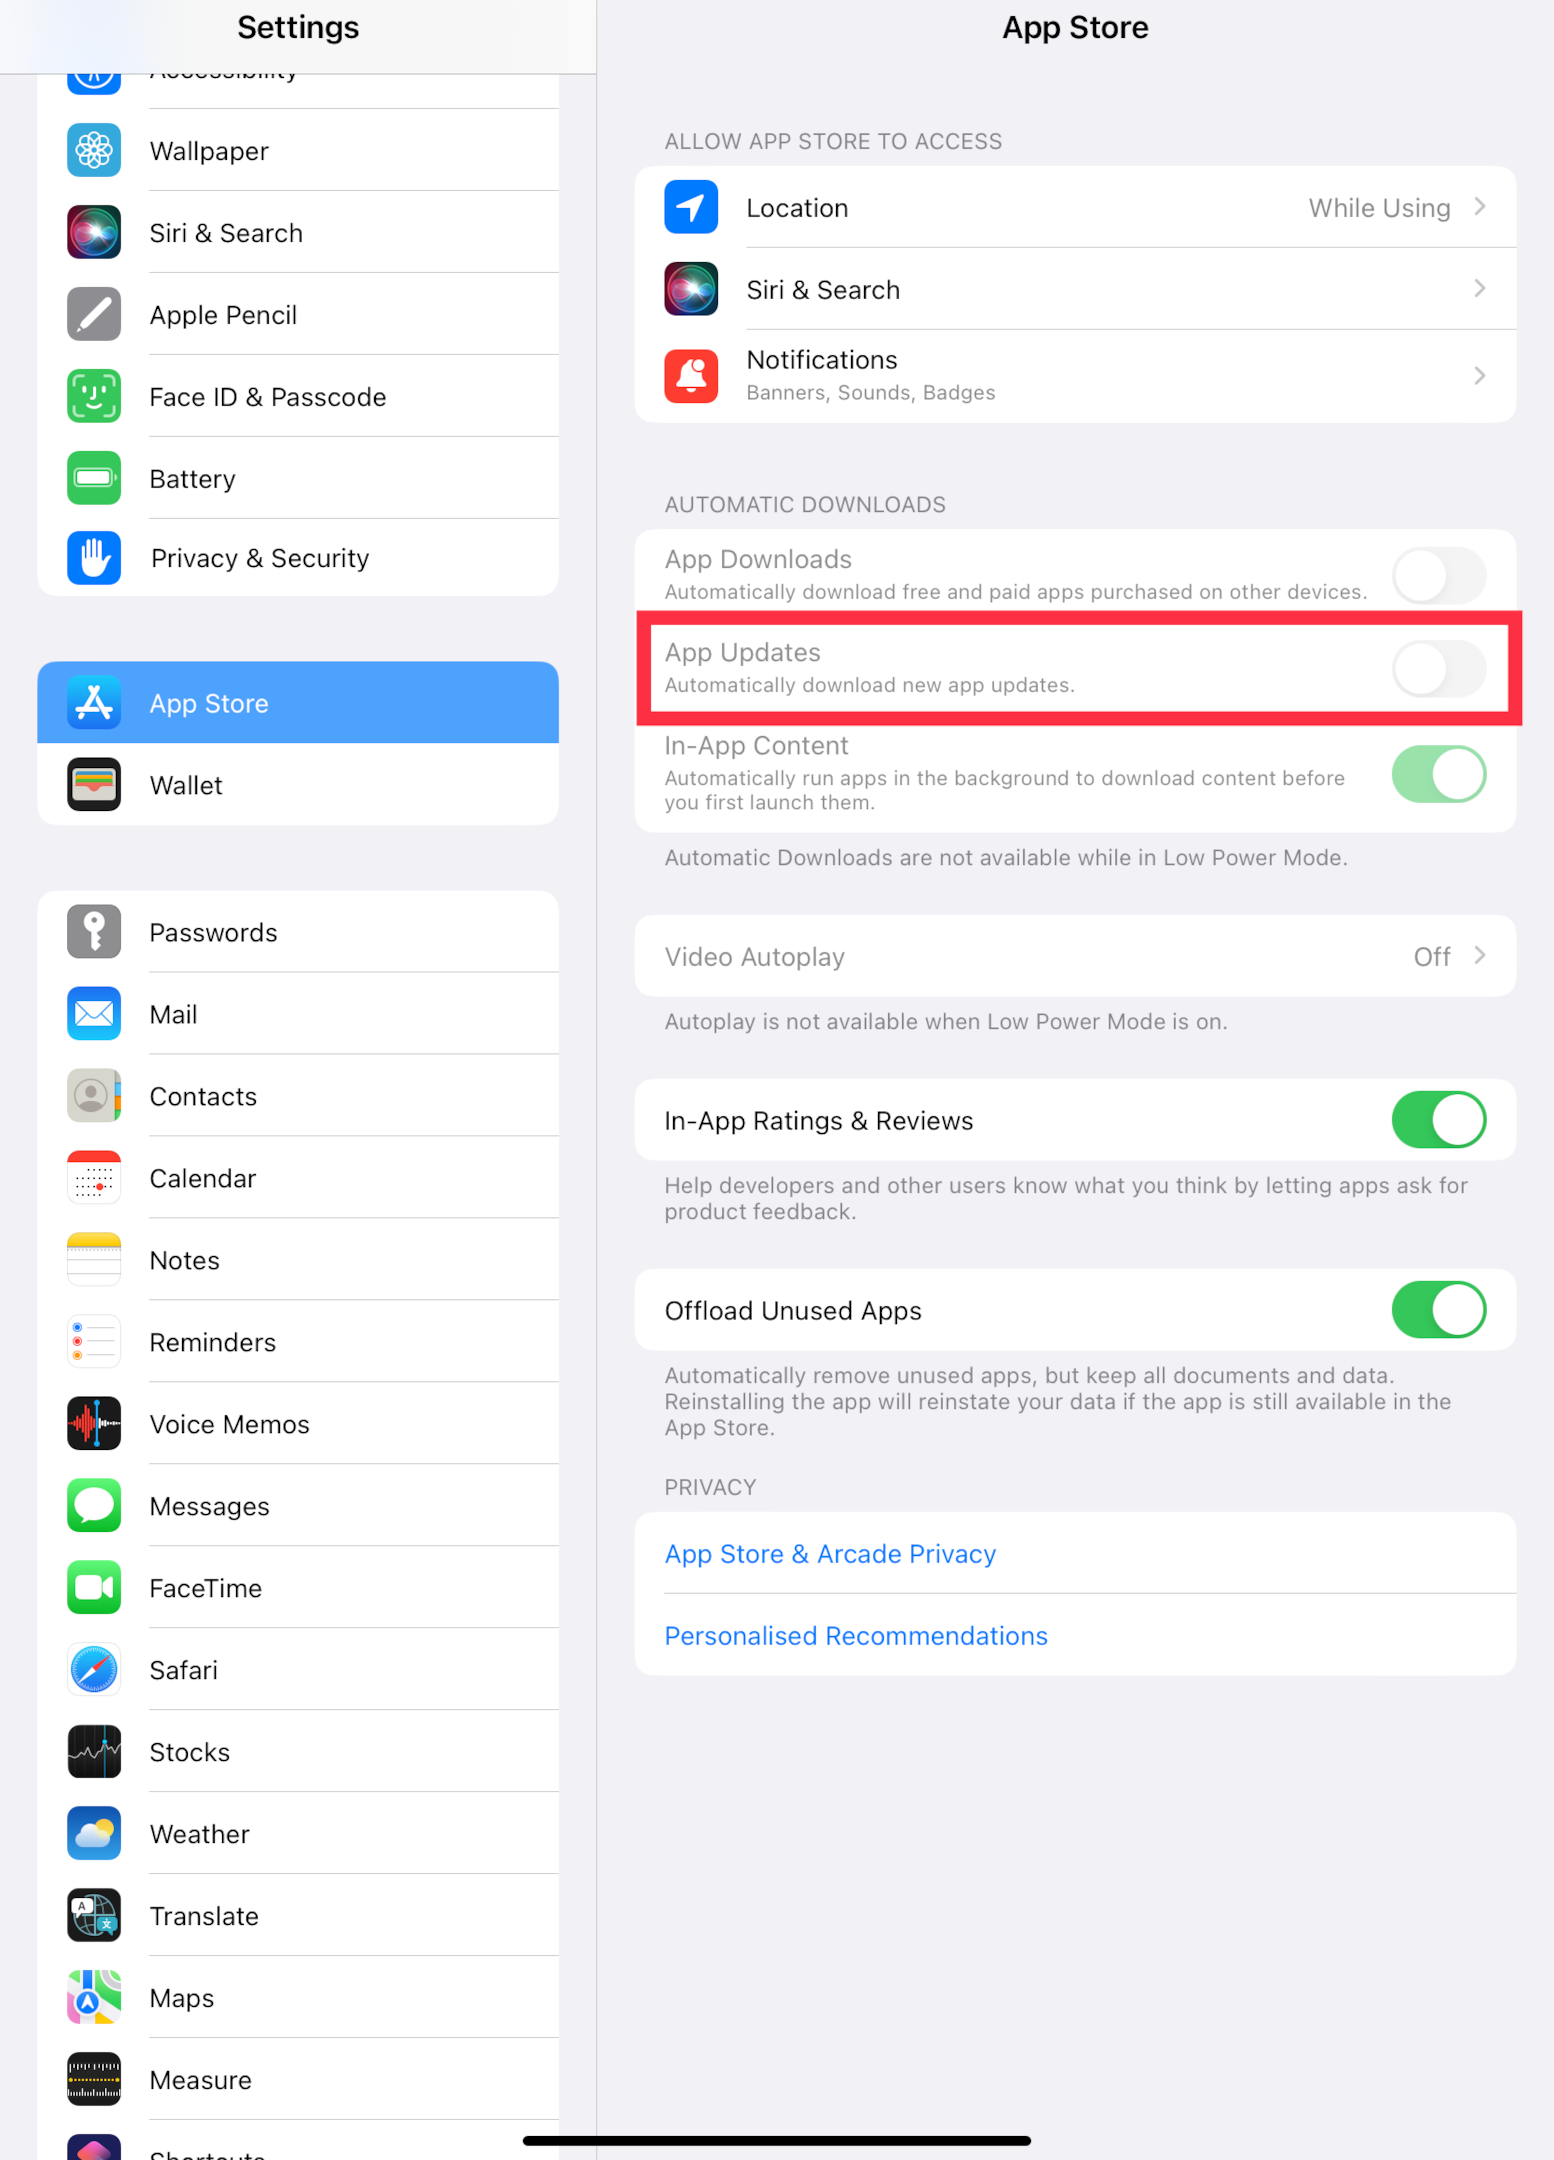 Remote.tools shows how to turn on auto-updates on iPhone & iPad